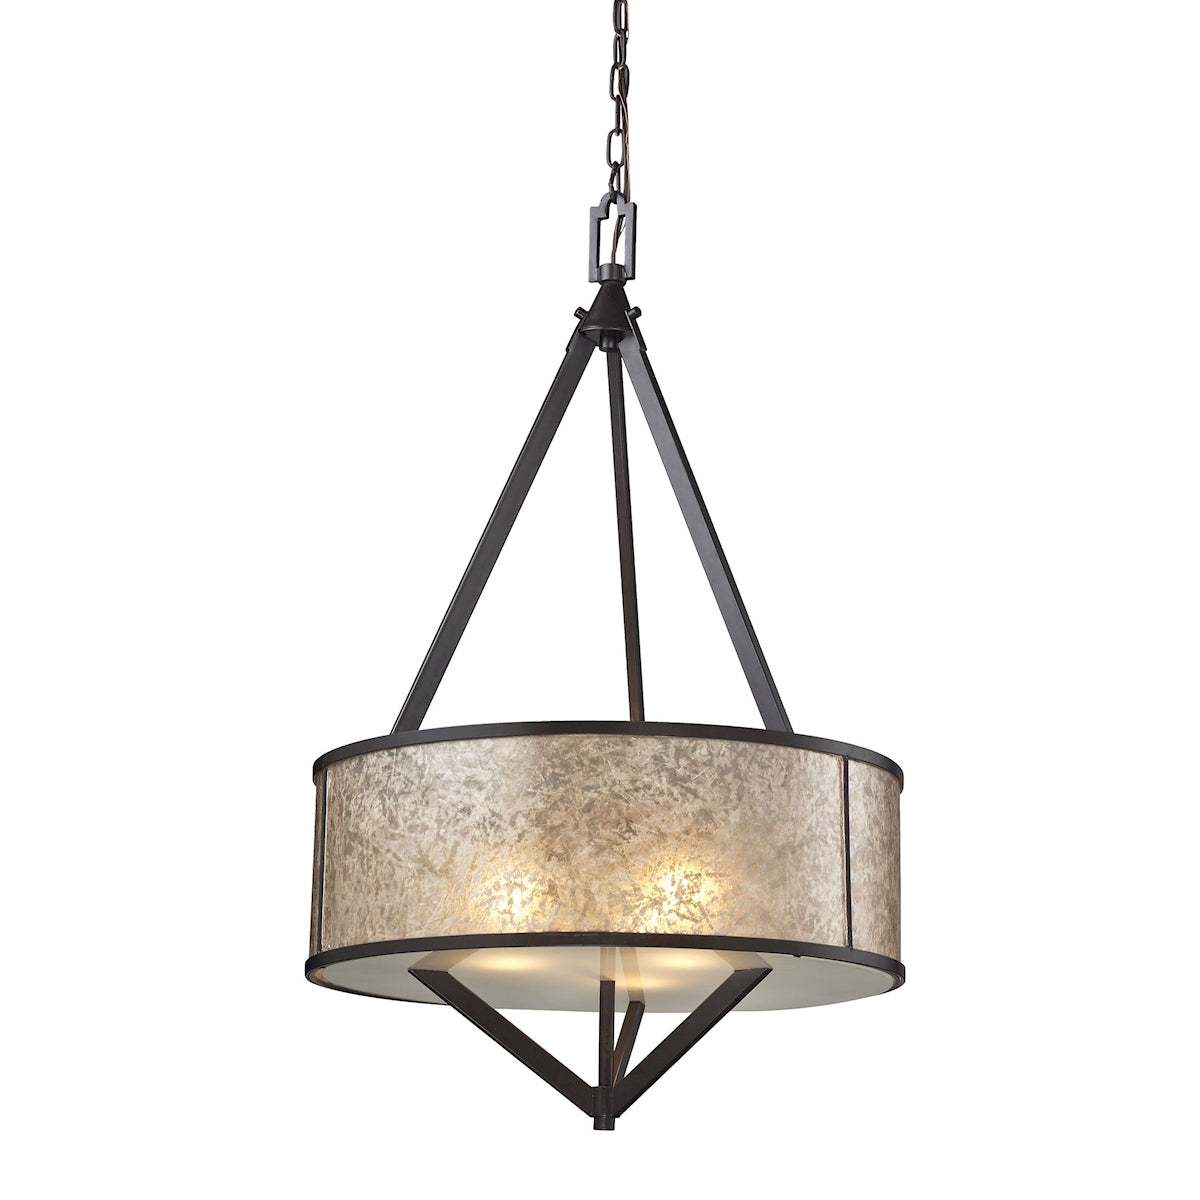 ELK Lighting 66951/3 Mica 3-Light Chandelier in Oil Rubbed Bronze with Mica Shade